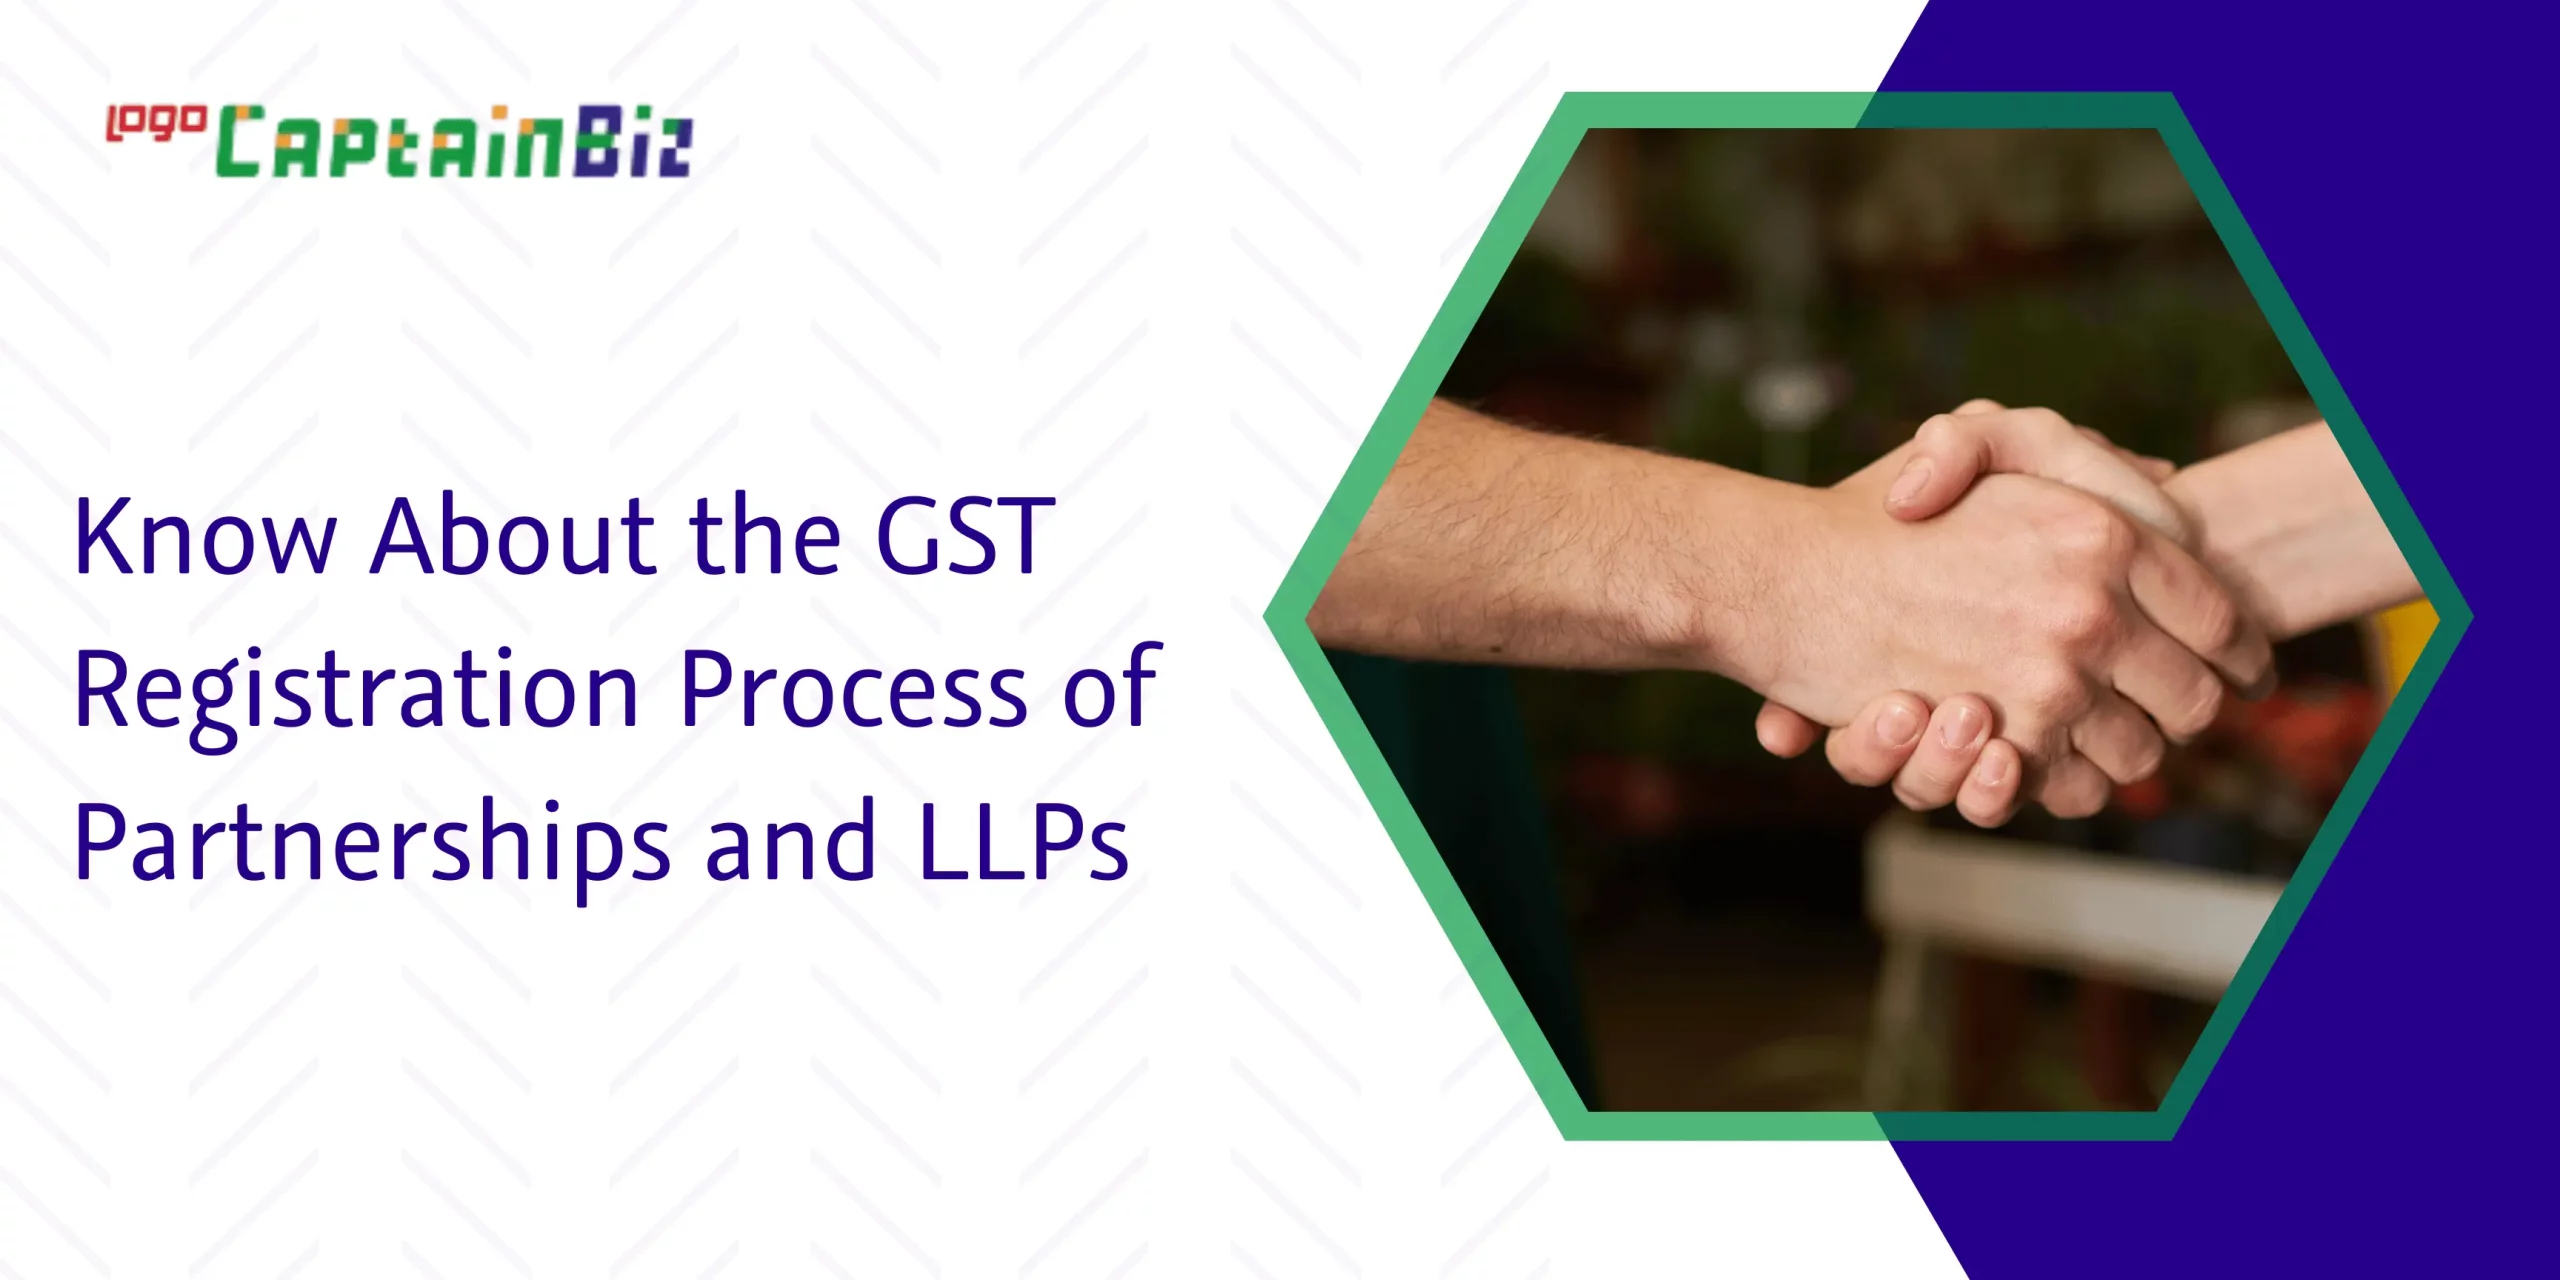 CaptainBiz: know about the gst registration process of partnerships and llps